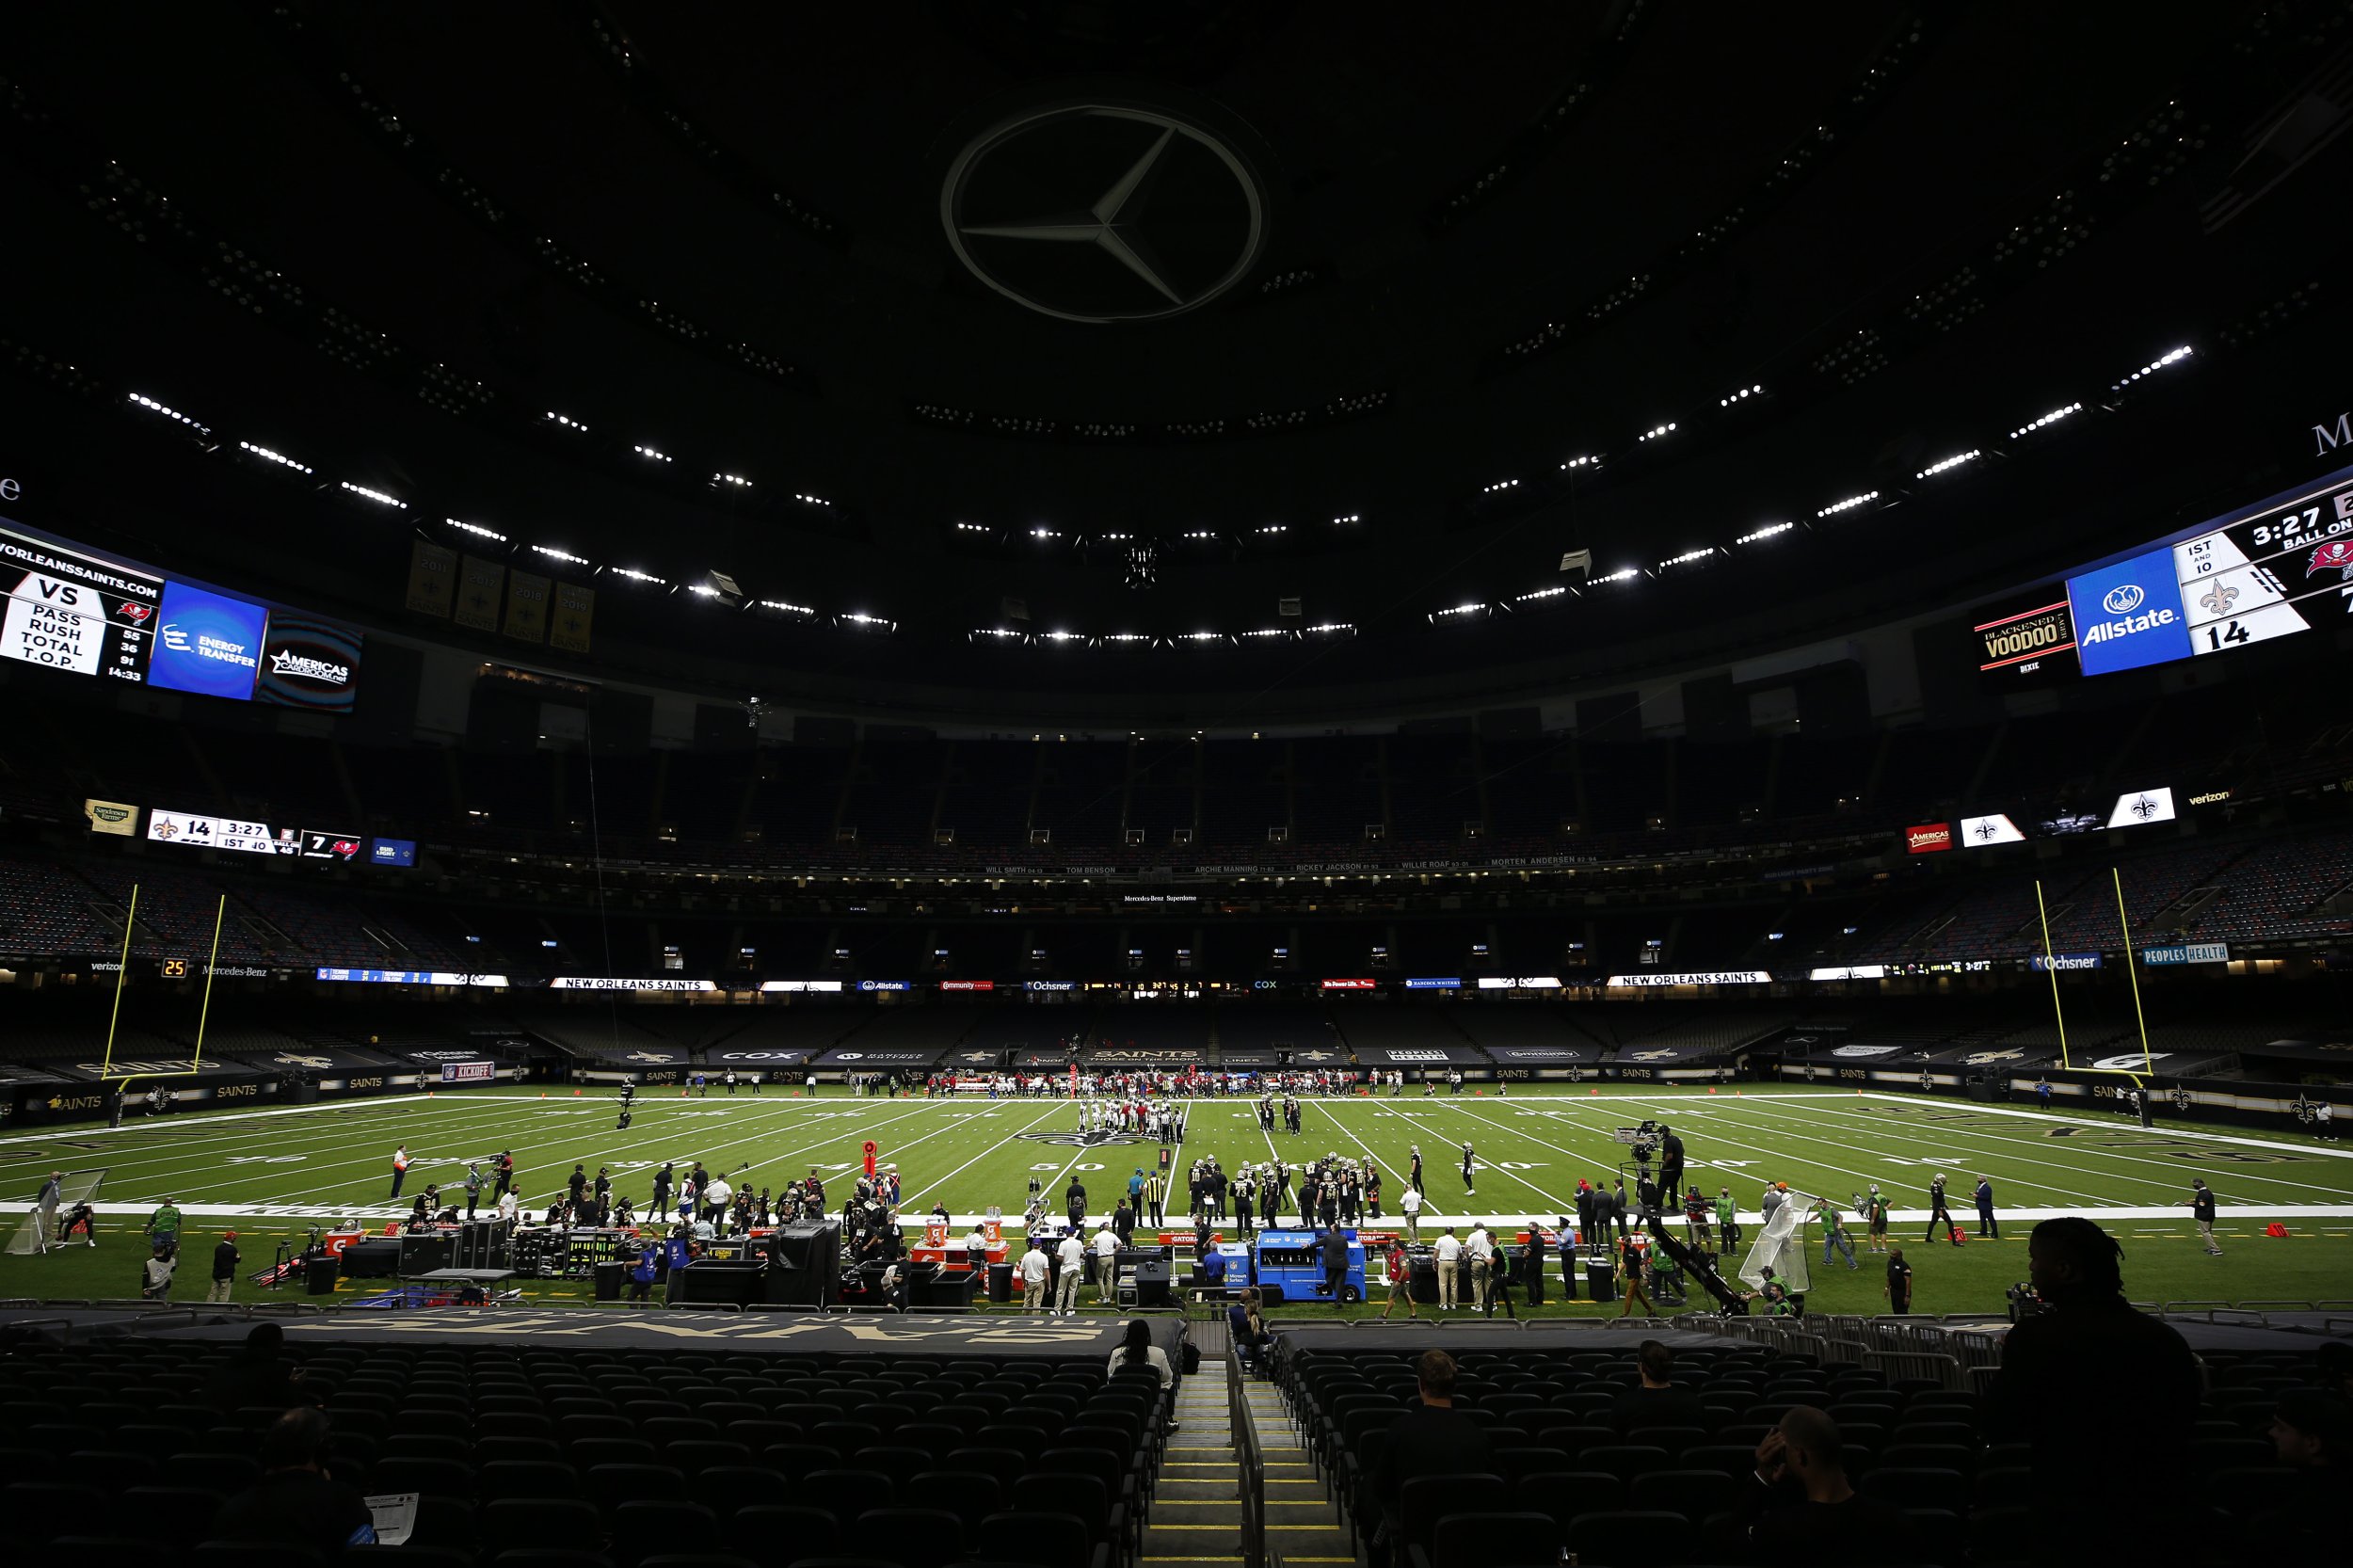 Super Bowl Locations Where The 2023, 2024, 2025 NFL Championship Games